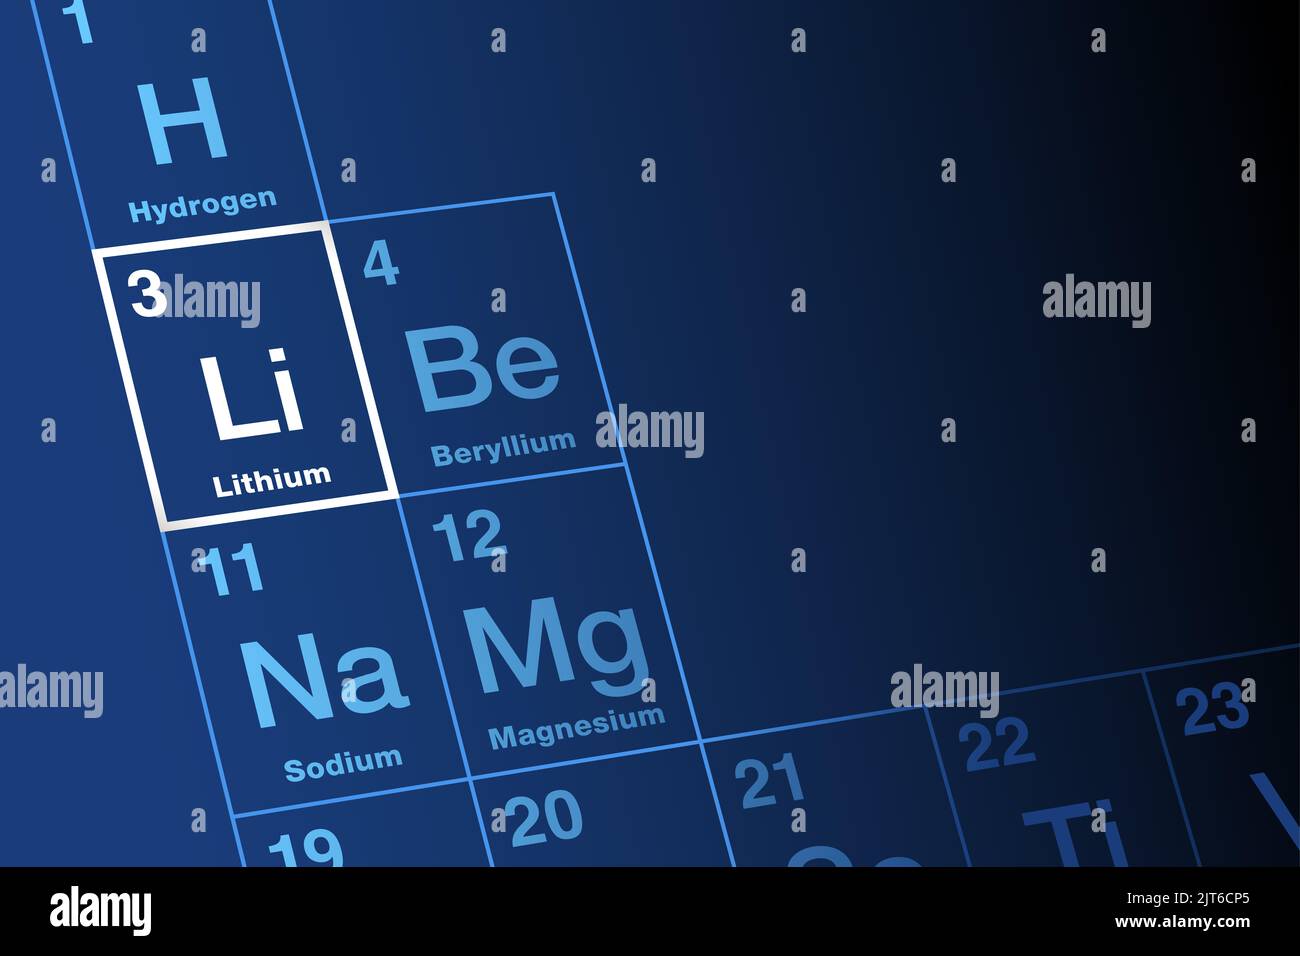 Lithium, chemical element on periodic table of elements. Alkali metal, with element symbol Li, from Greek lithos, stone. Atomic number 3. Stock Photo